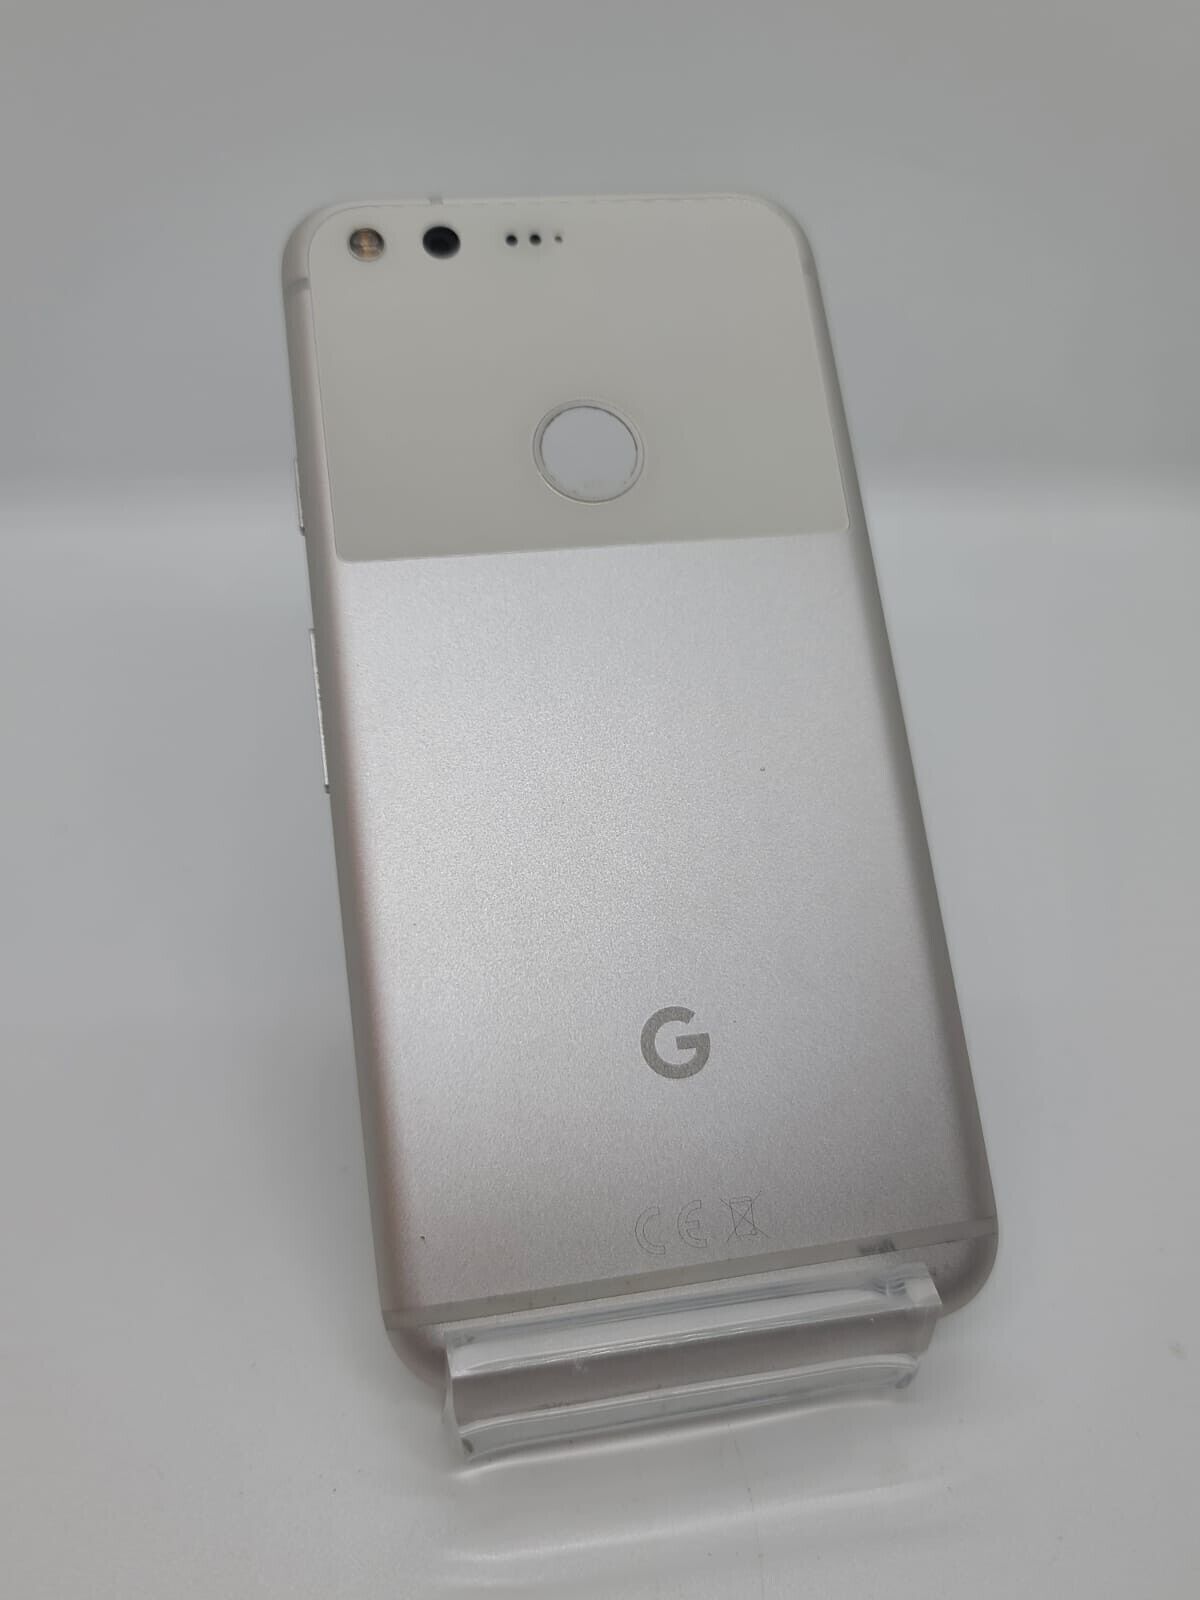 Google Pixel 32GB Android 4G LTE Smartphone G-2PW4100 FOR PARTS WORKING